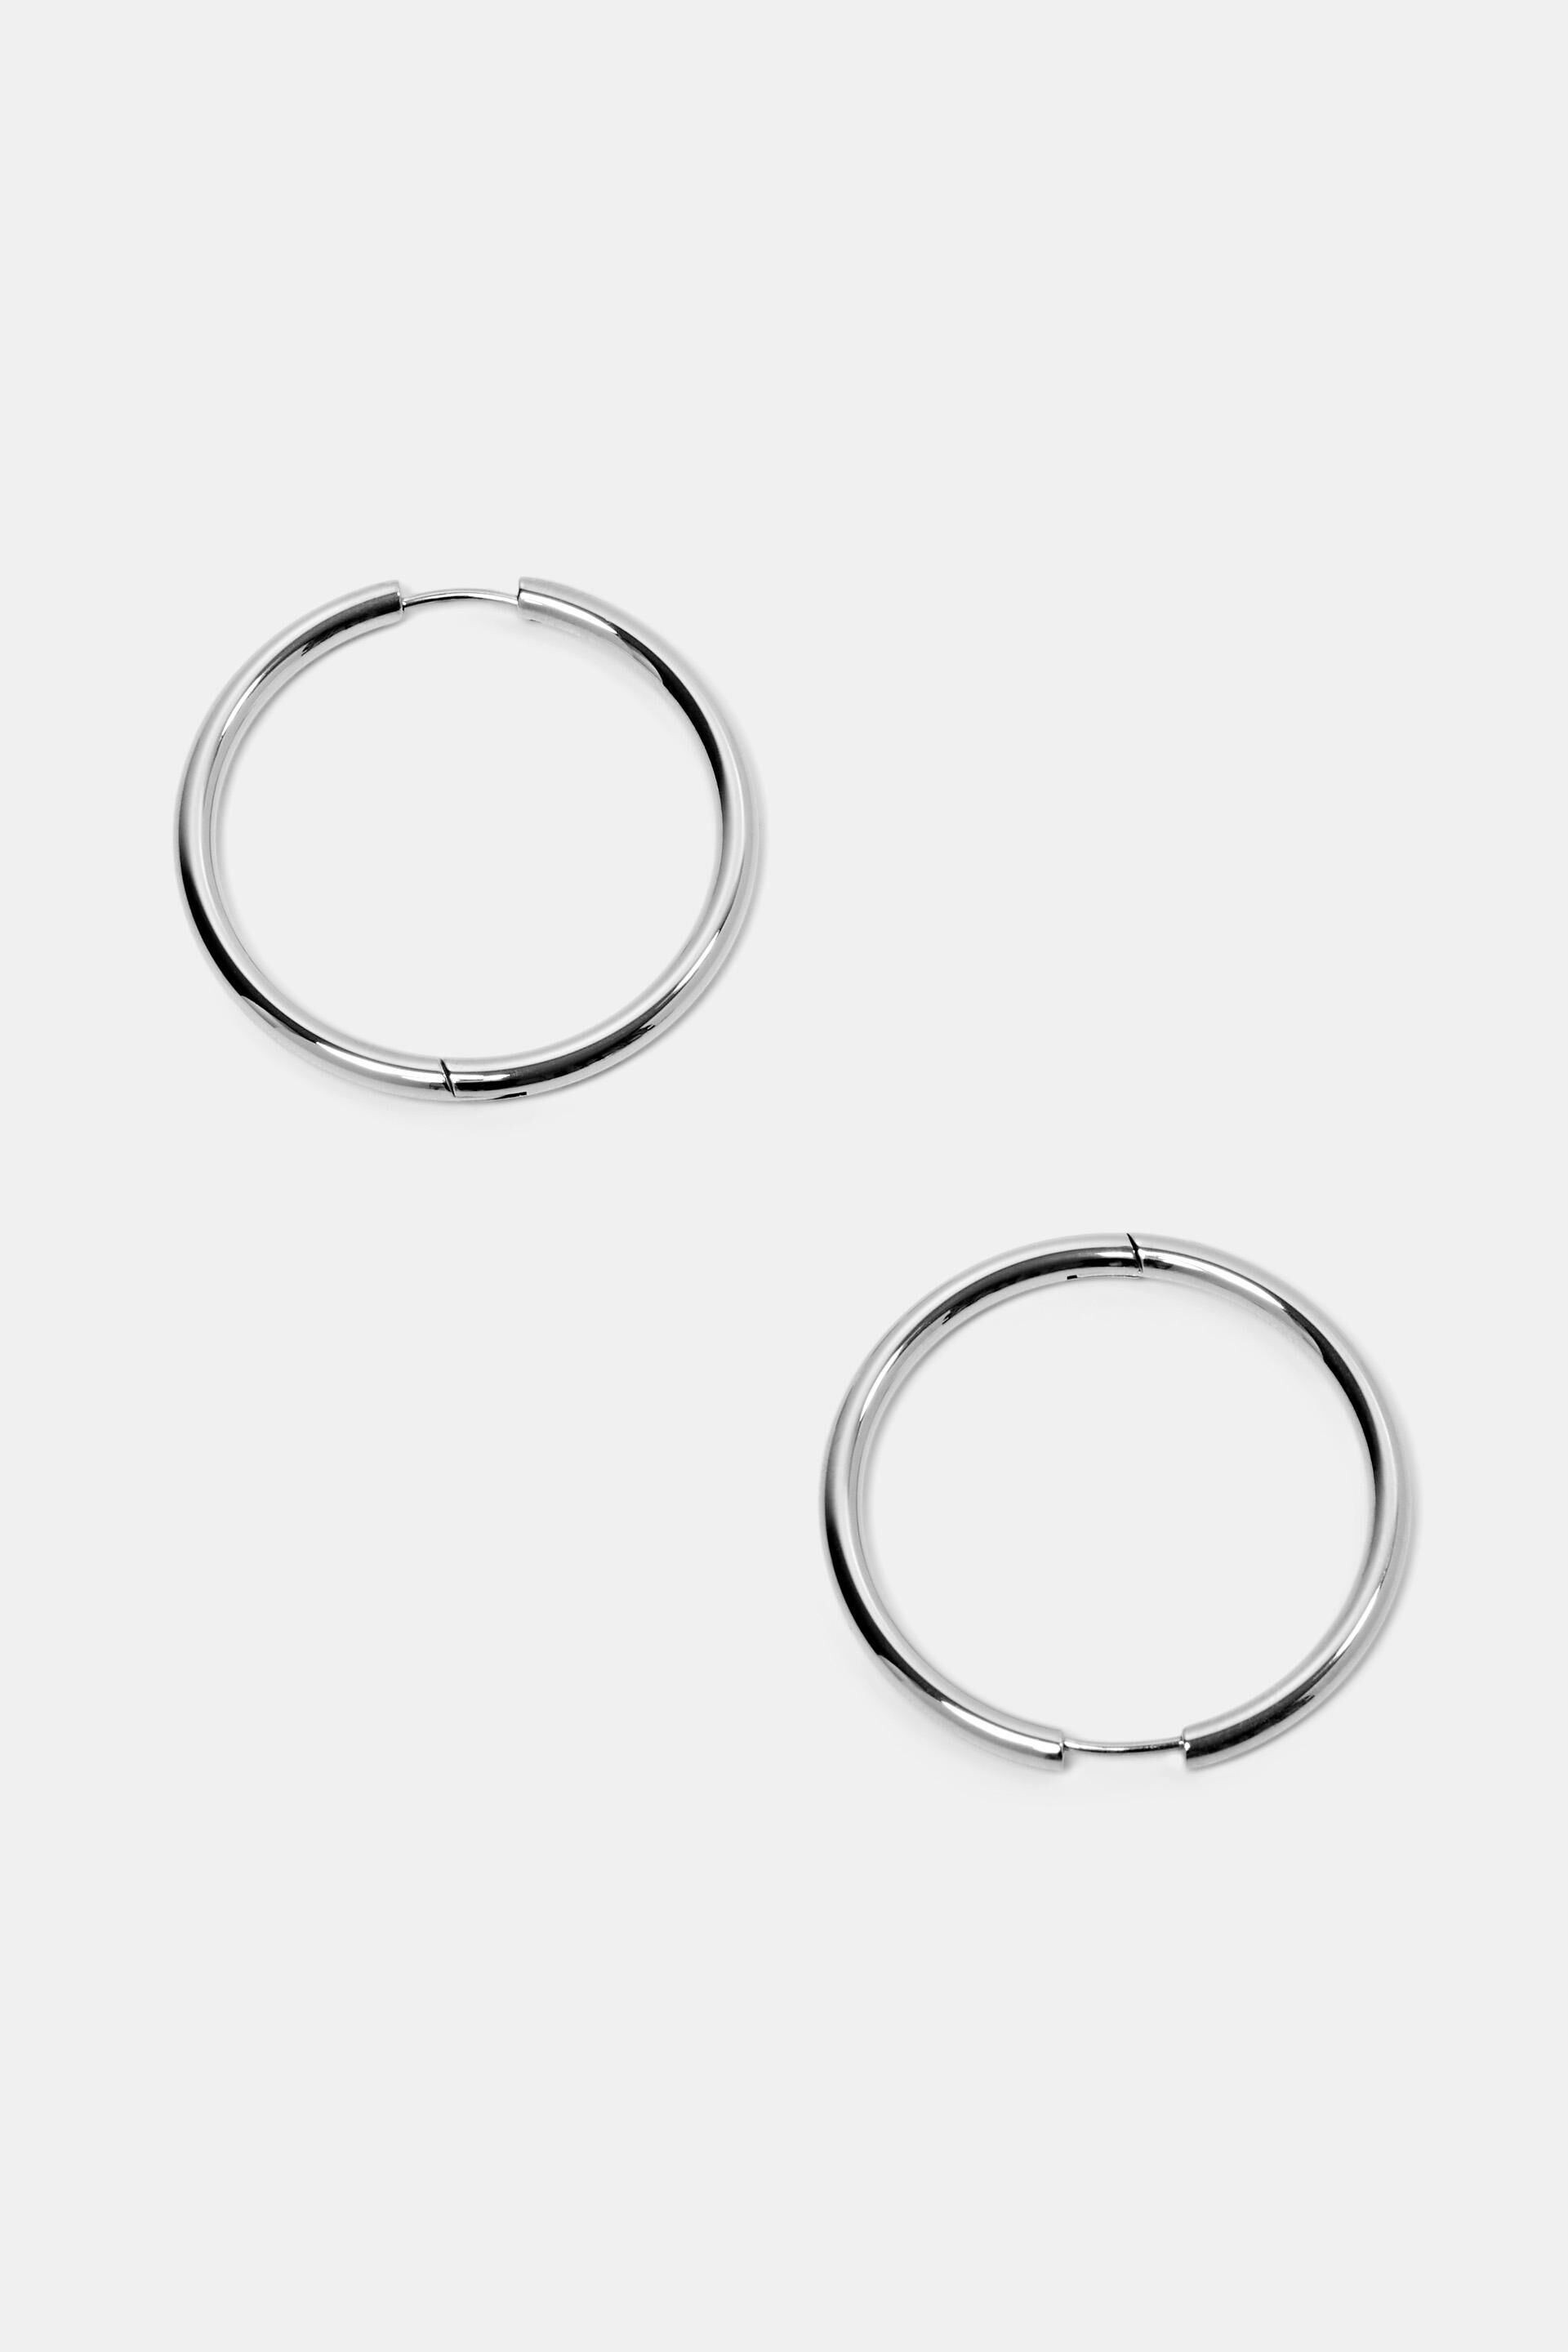 2PCS Tiny Stainless Steel Huggie Small Hoop Earrings For Women Round Circle  Punk Unisex Rock Earring Cartilage Piercing Jewelry - AliExpress